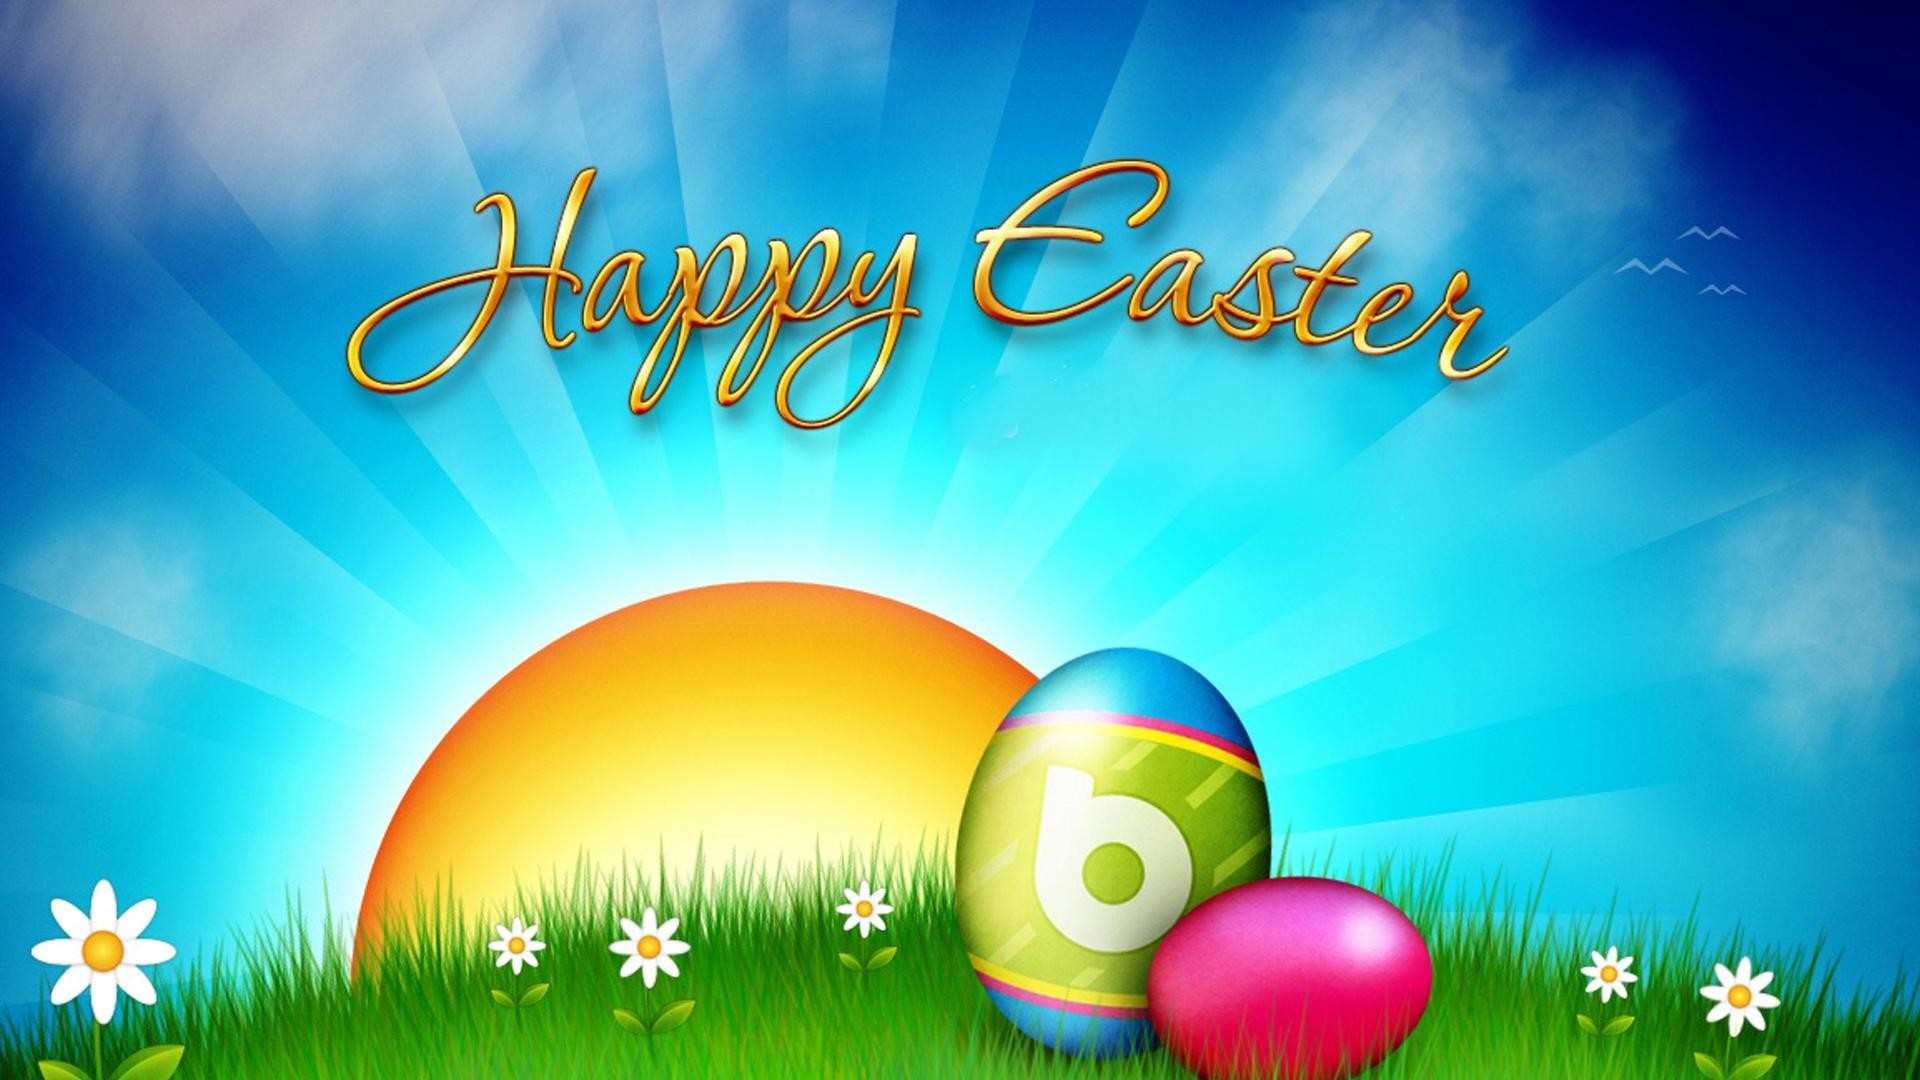 1920x1080 15 Happy Easter 2017 Wallpapers For Desktop - Educational Entertainment.  Background ...